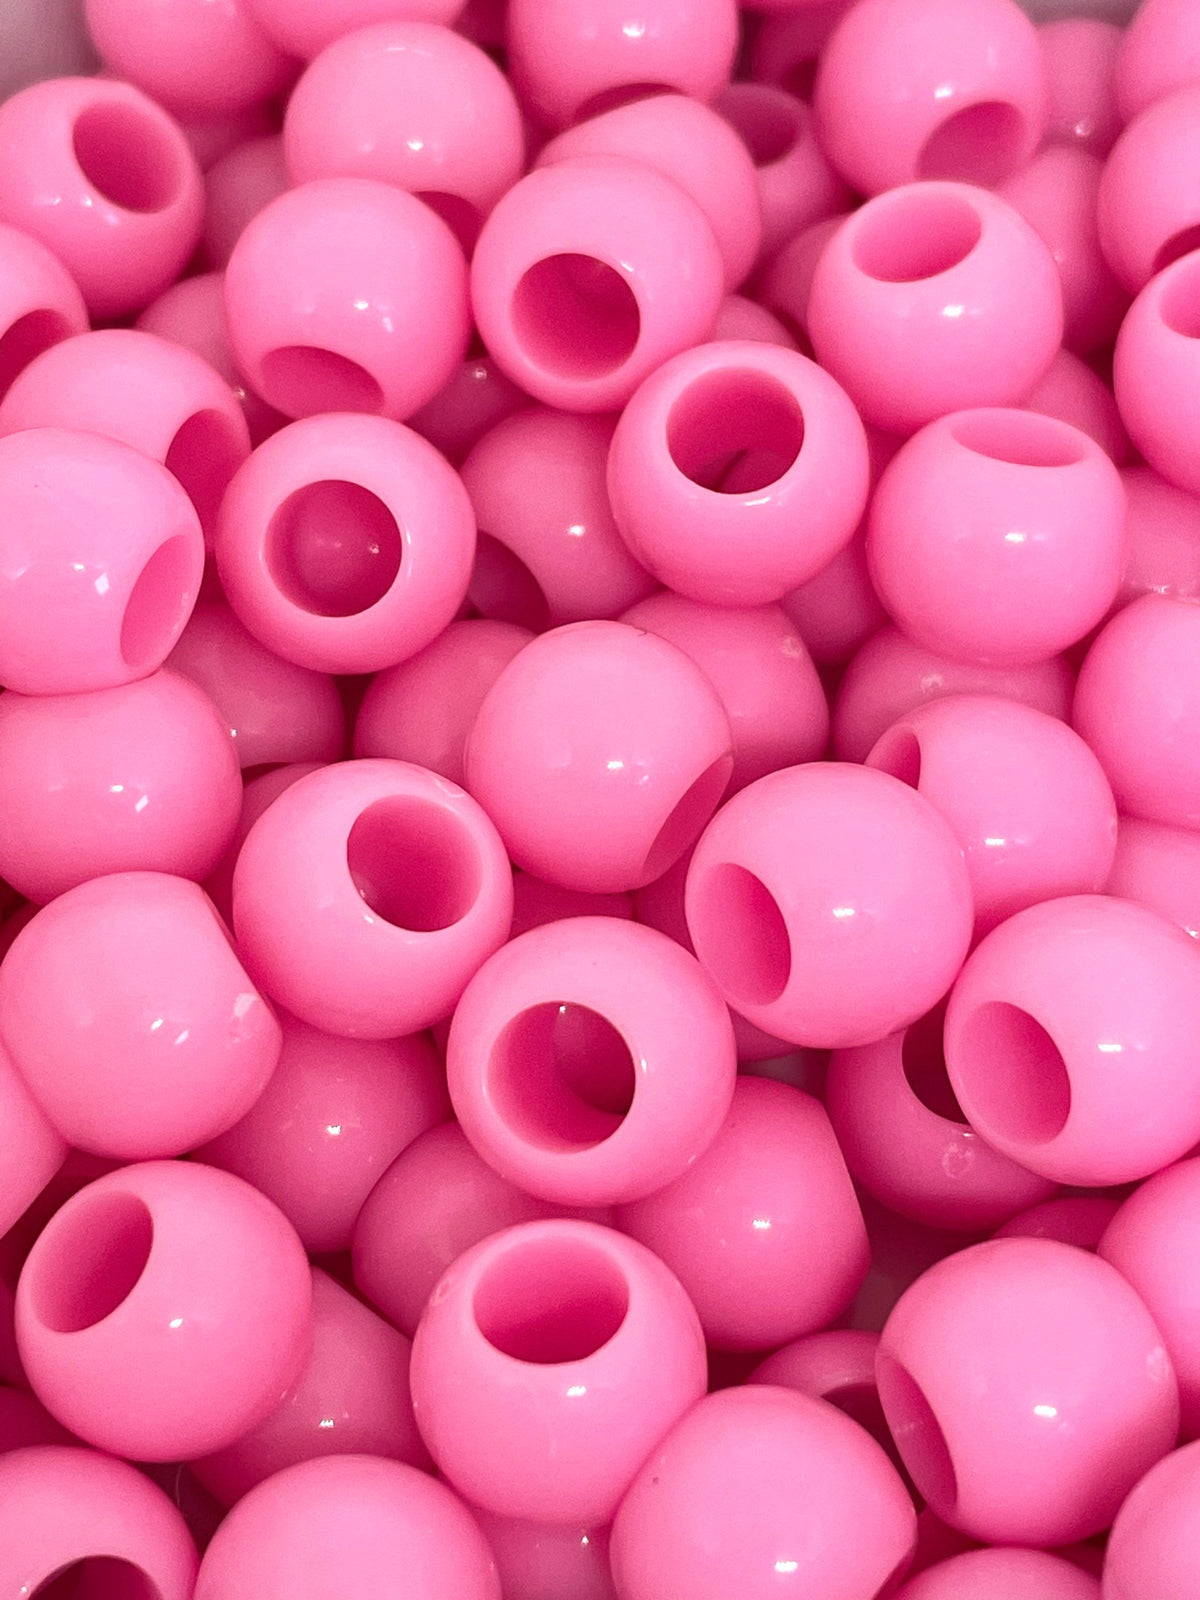 Light Pink Pony Beads, Round Pink Beads for Hair, Hair Beads, Dreadloc